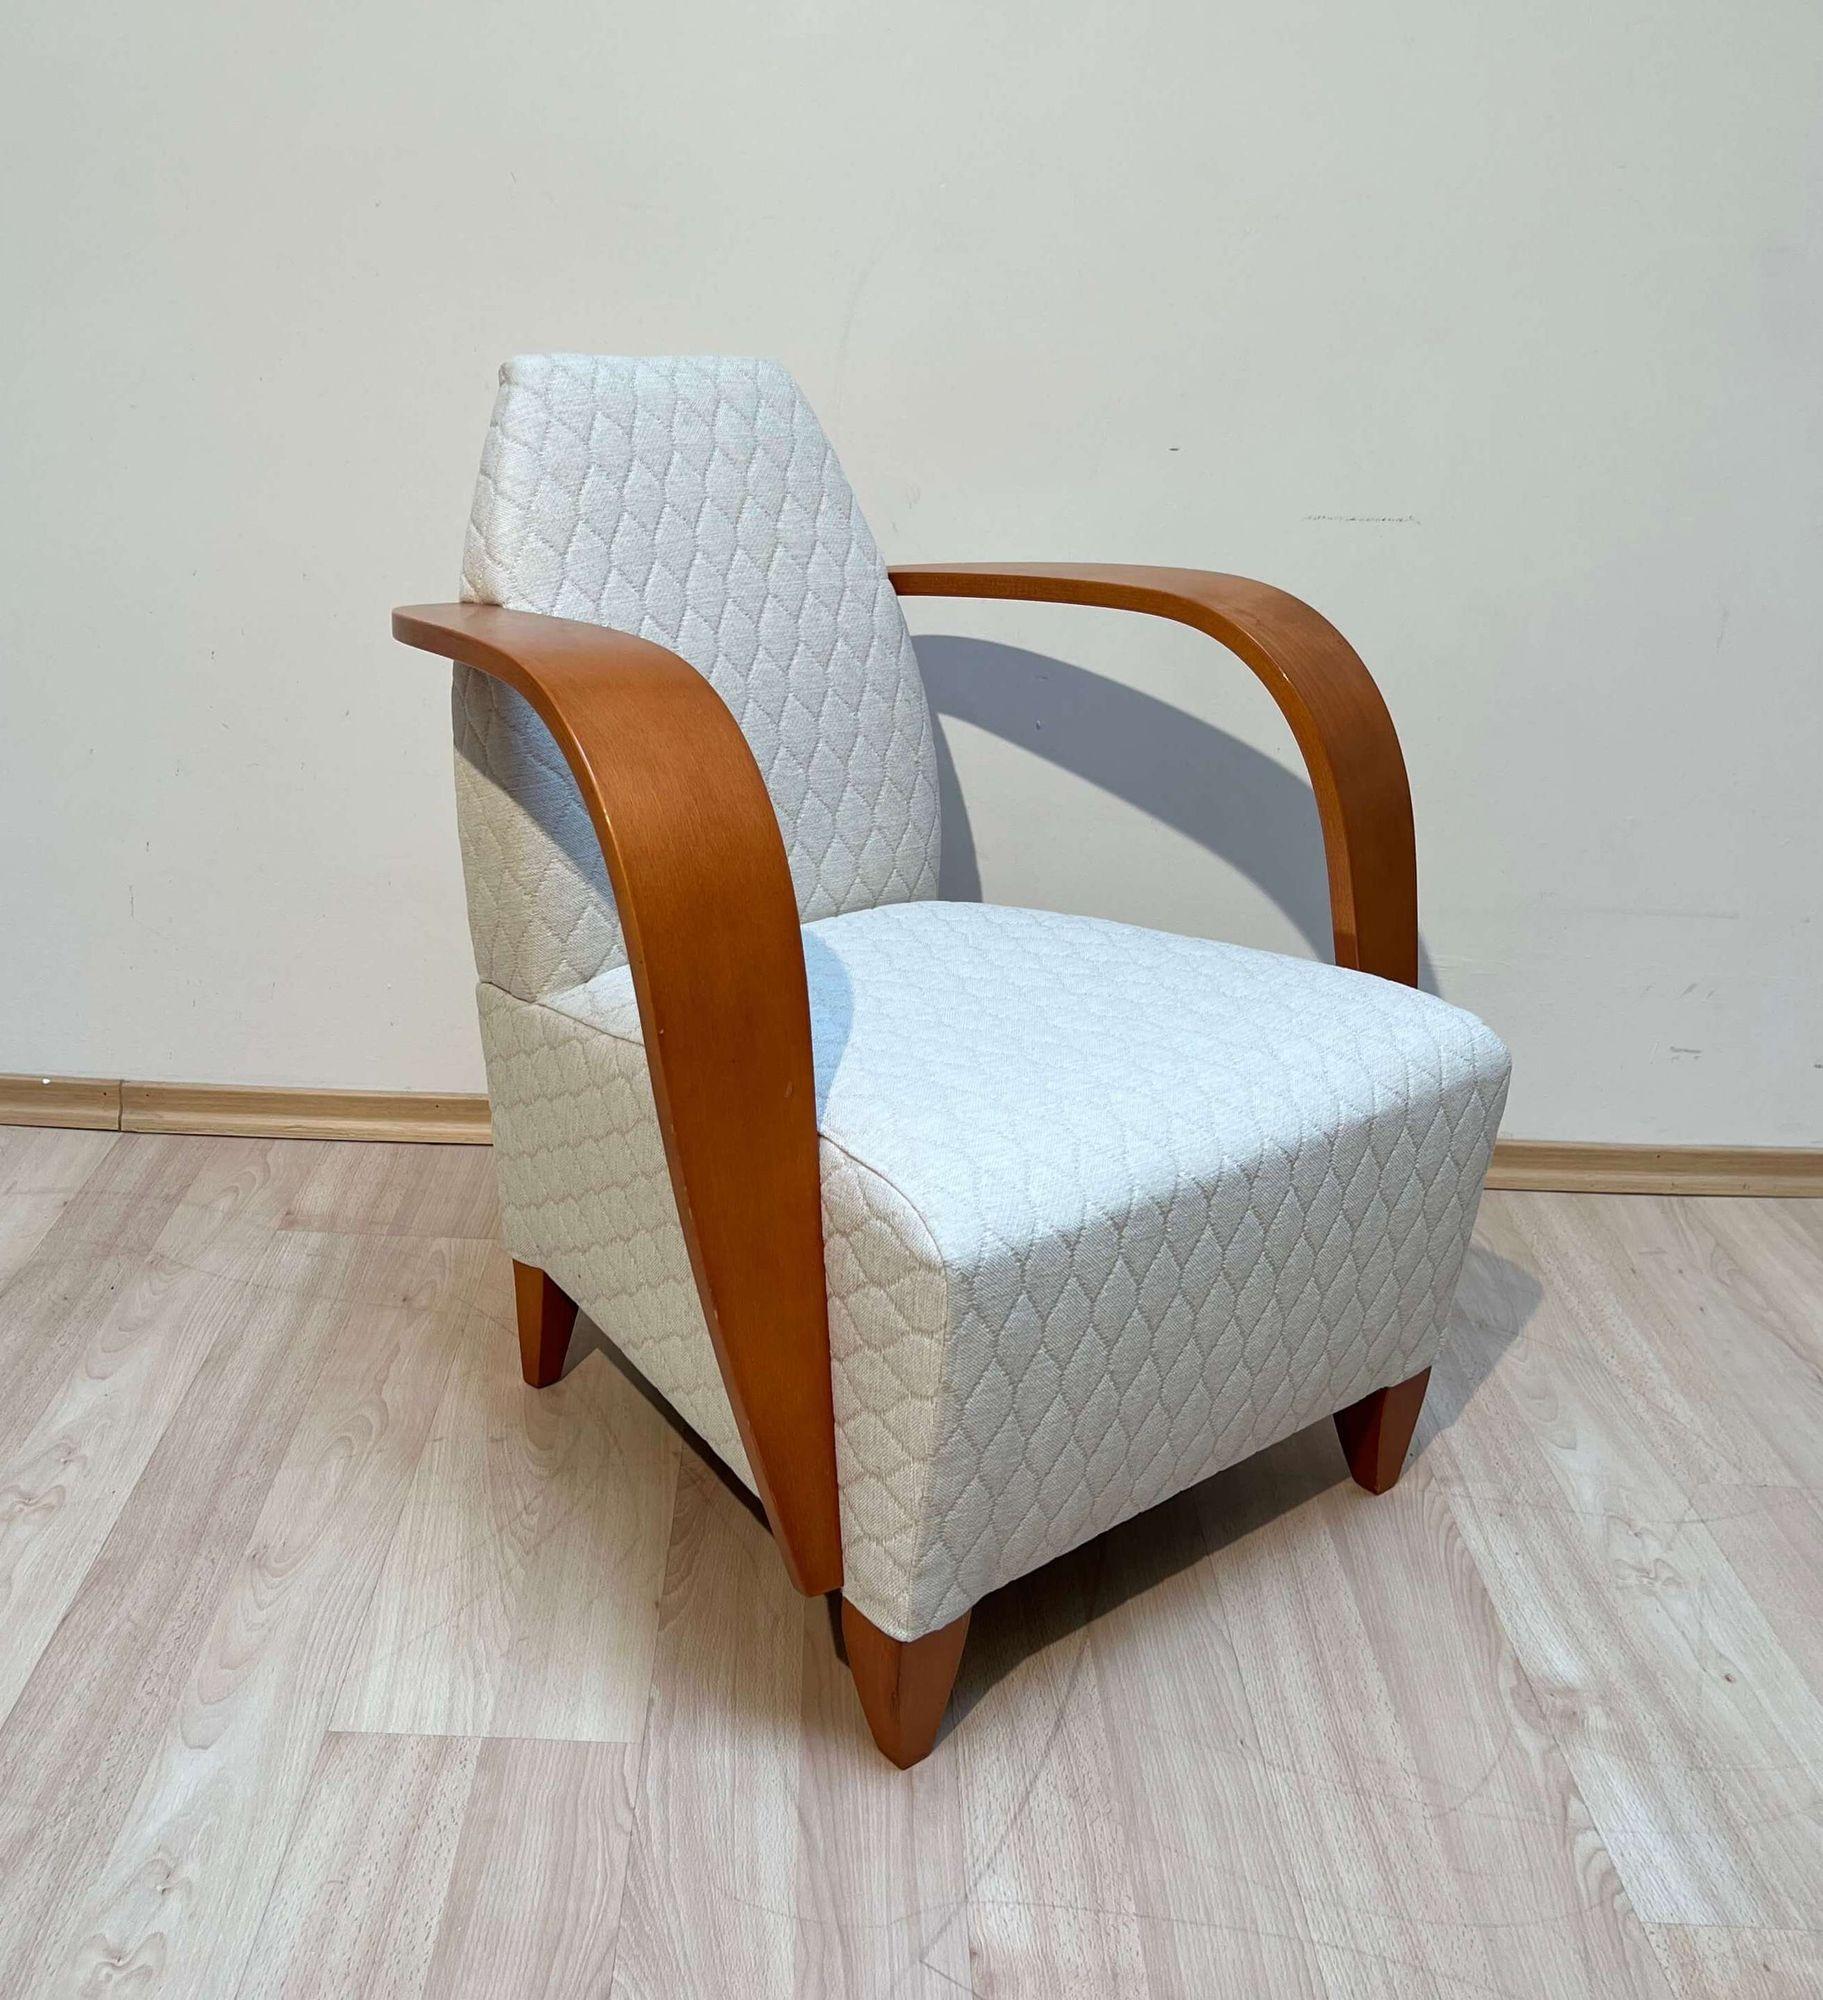 Spanish Design Arm Chair, Beech Wood, Cream-white Quilt Fabric, Spain, 1990s For Sale